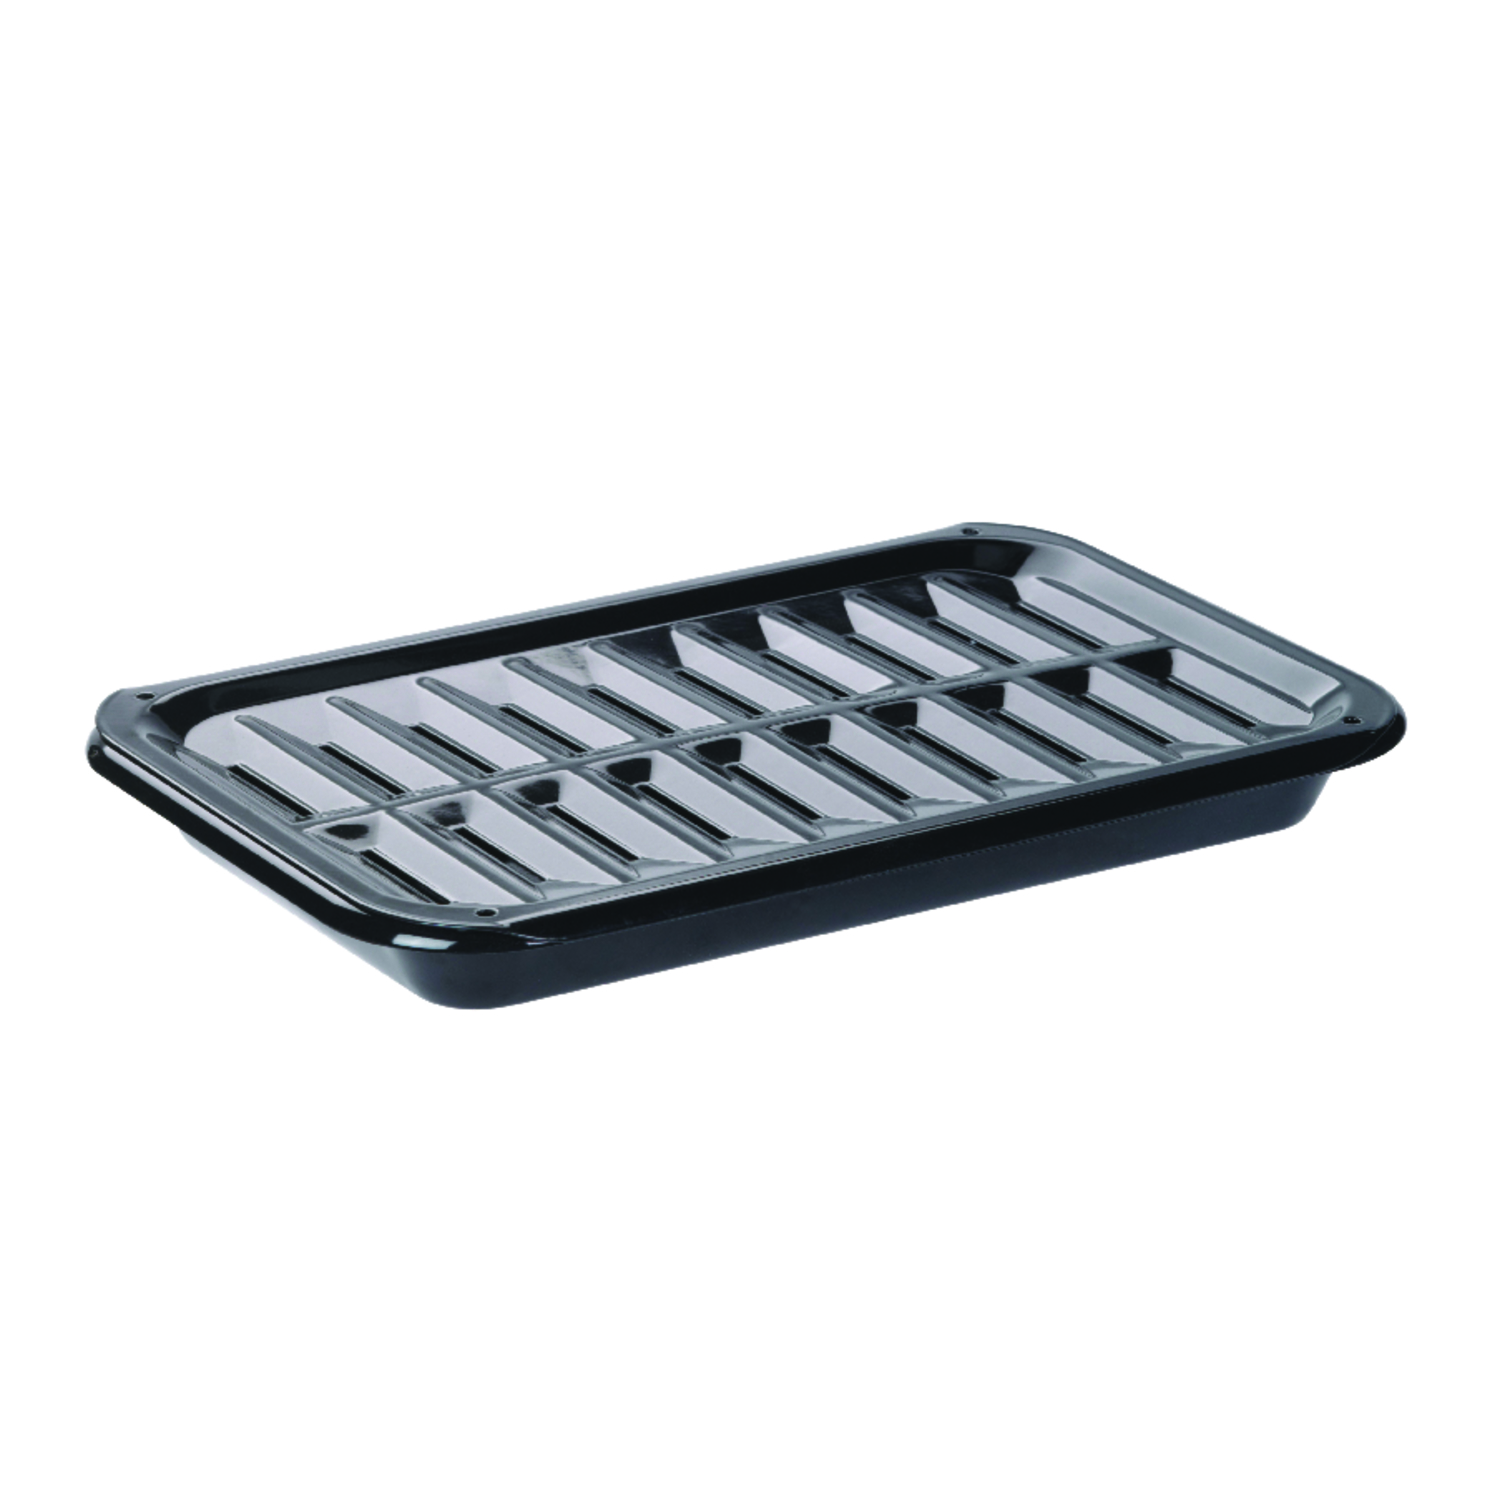 Photos - Other Accessories A&D Range Kleen Porcelain Broiler Pan and Grill 8.625 in. W X 13 in. L BP106X 